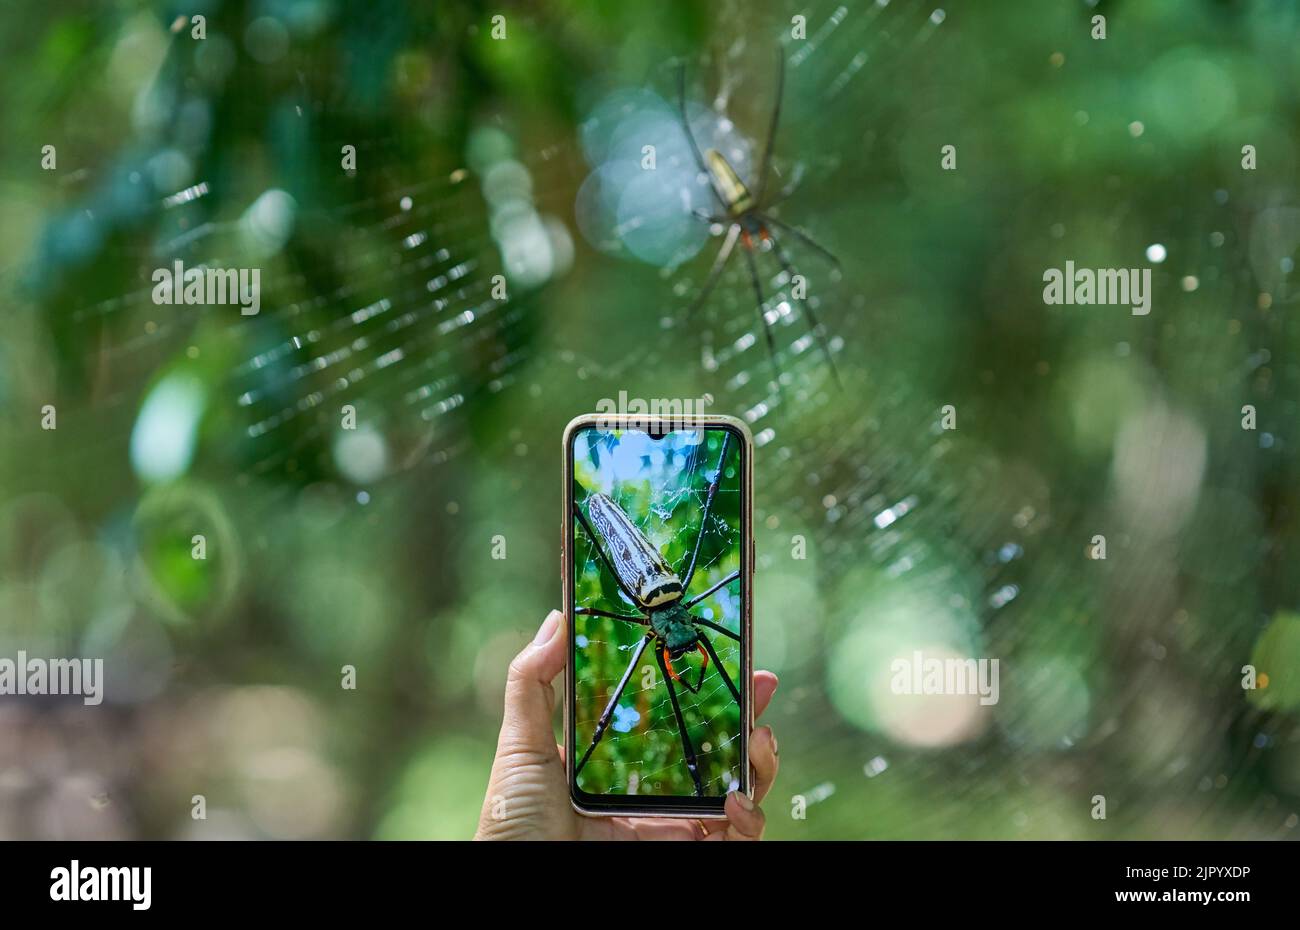 Using a smart phone to take a photo of a large spider in a web, in the woods. Stock Photo